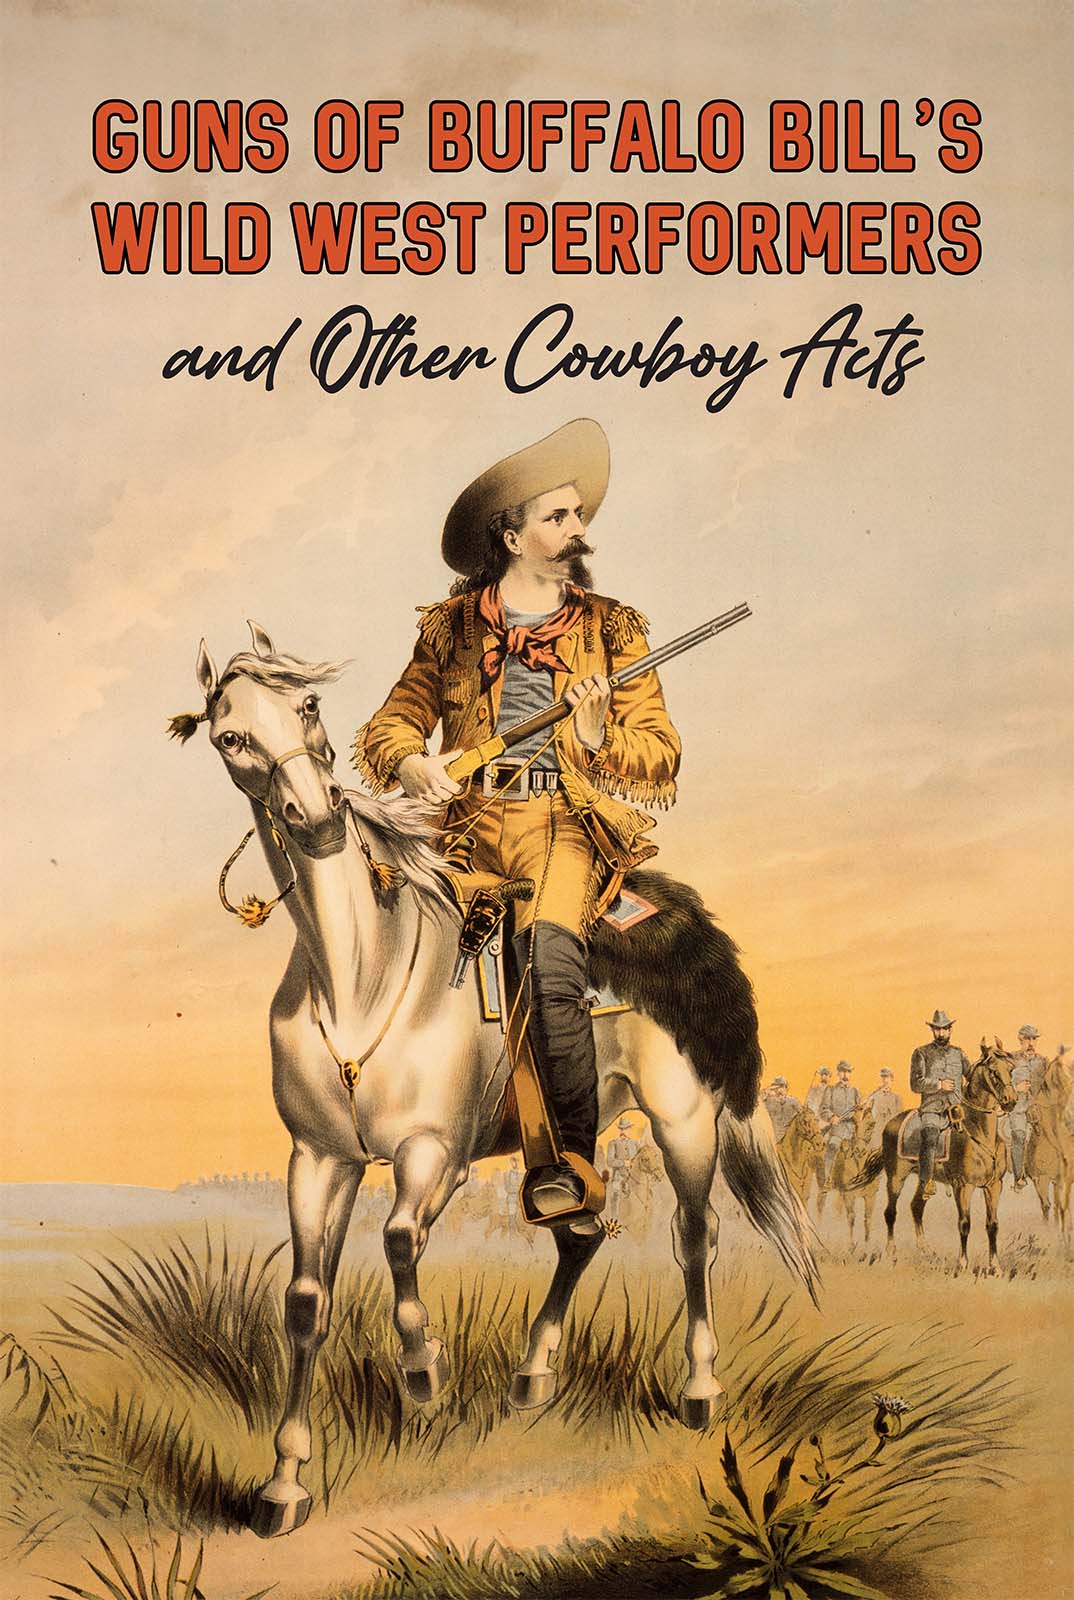 Poster man on horseback in frontier garb holding a rifle. Text reads "The Scout Buffalo Bill - Col. W.F. Cody." 1.69.32 (detail)